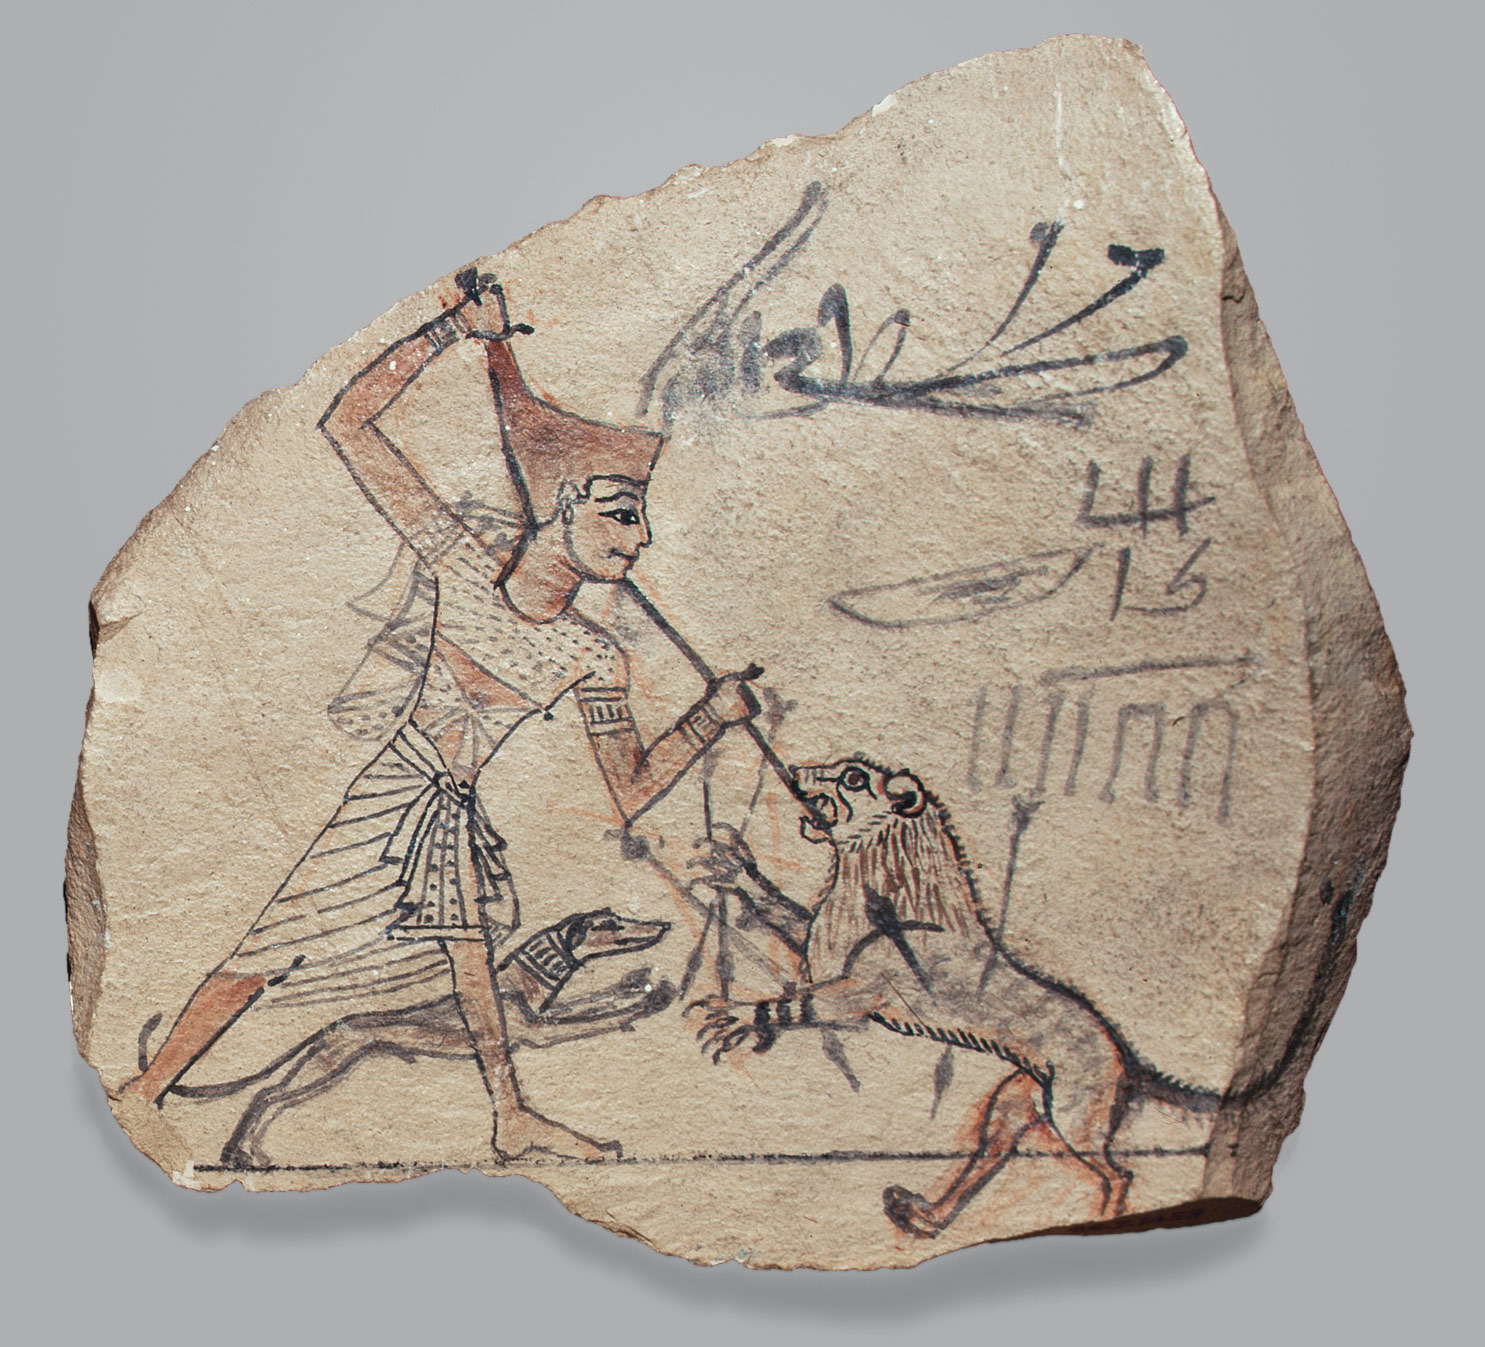 Artists Sketch of Pharaoh Spearing a Lion